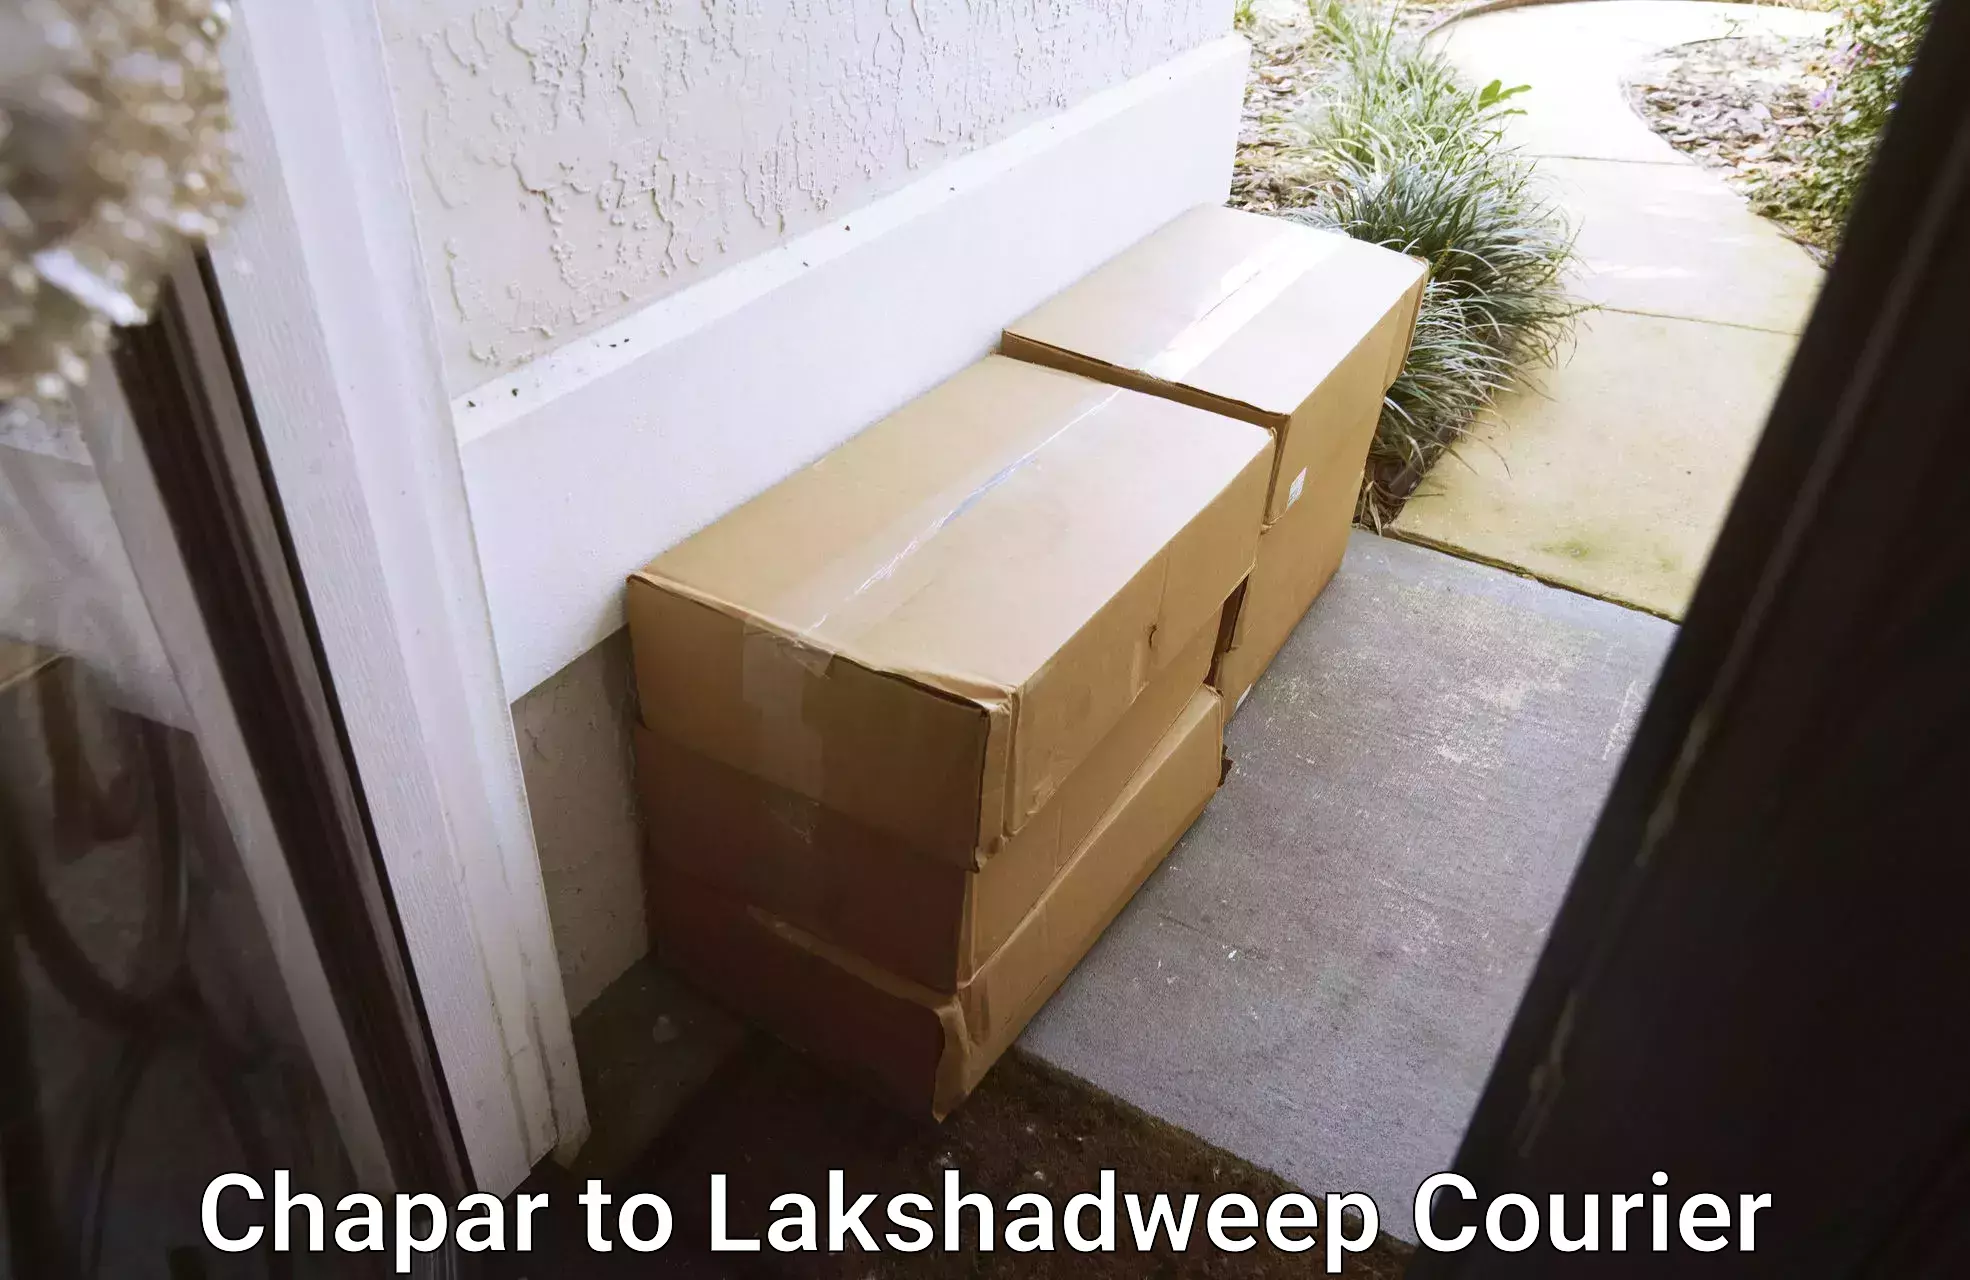 Lightweight parcel options in Chapar to Lakshadweep